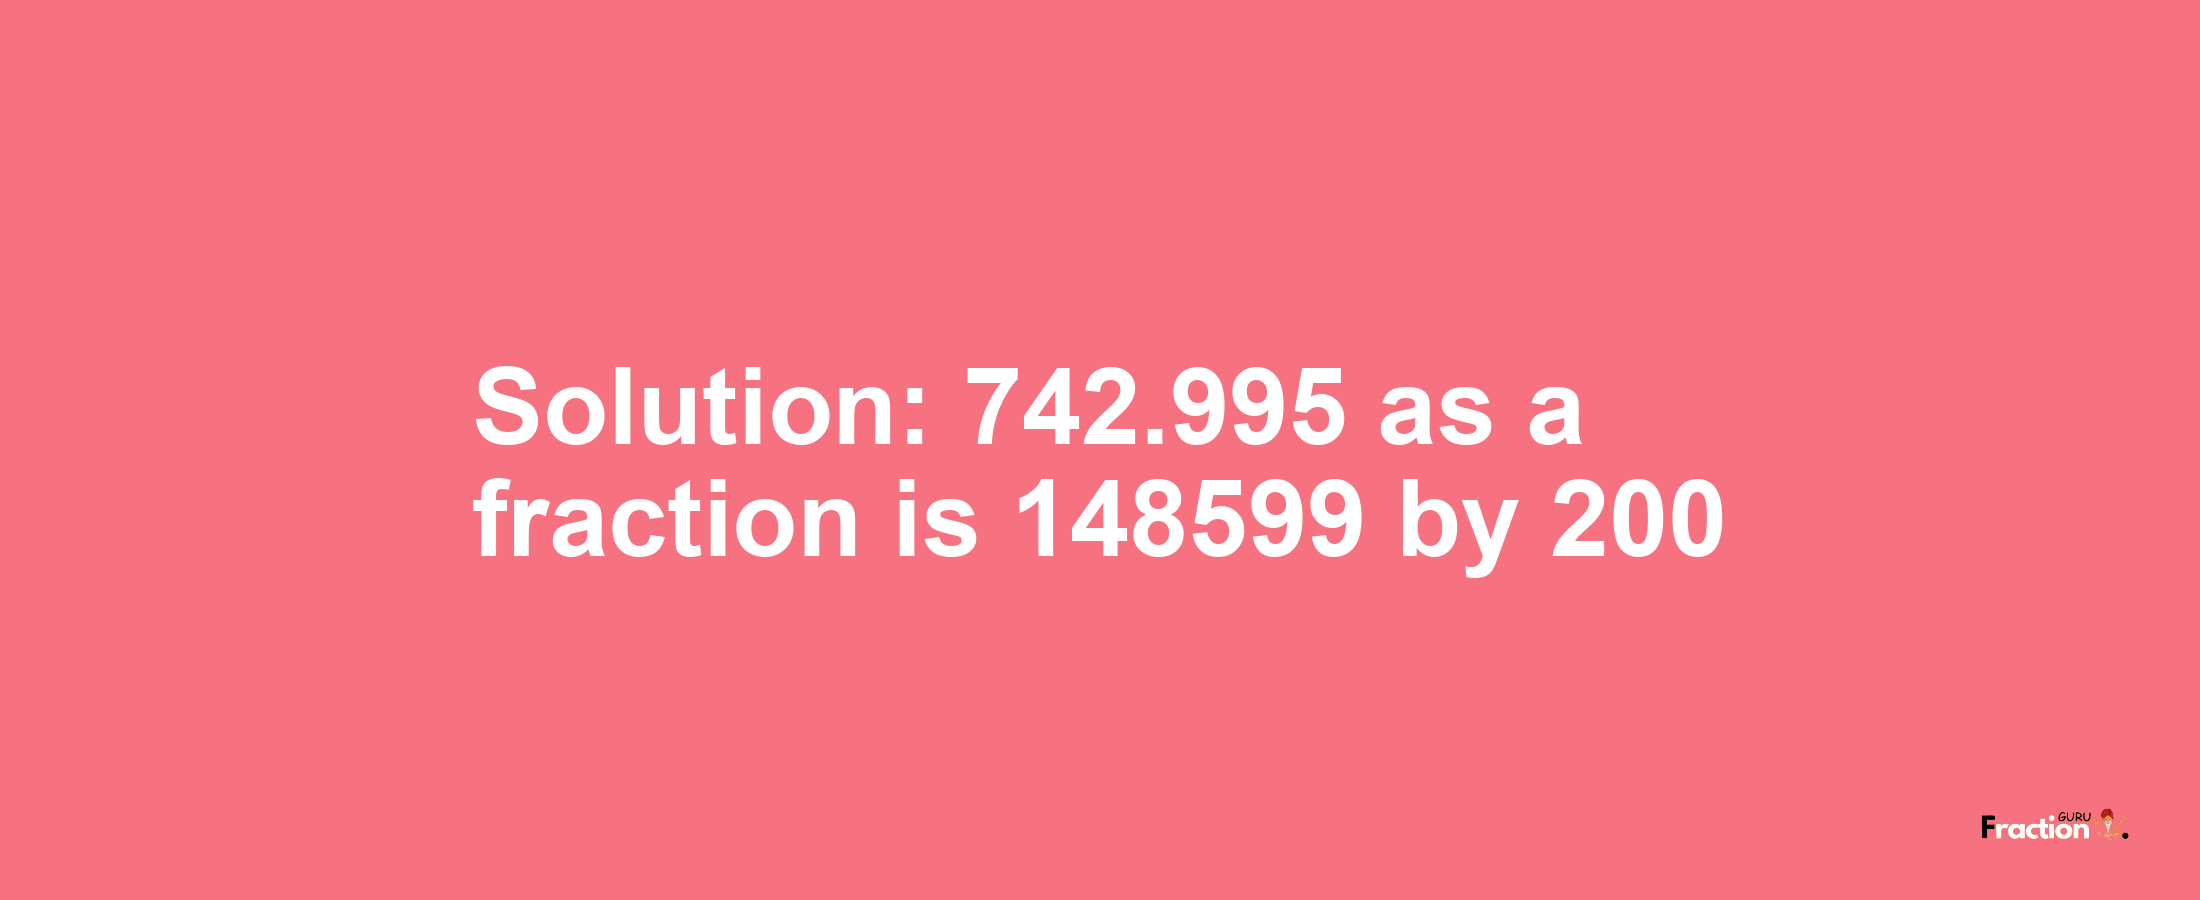 Solution:742.995 as a fraction is 148599/200